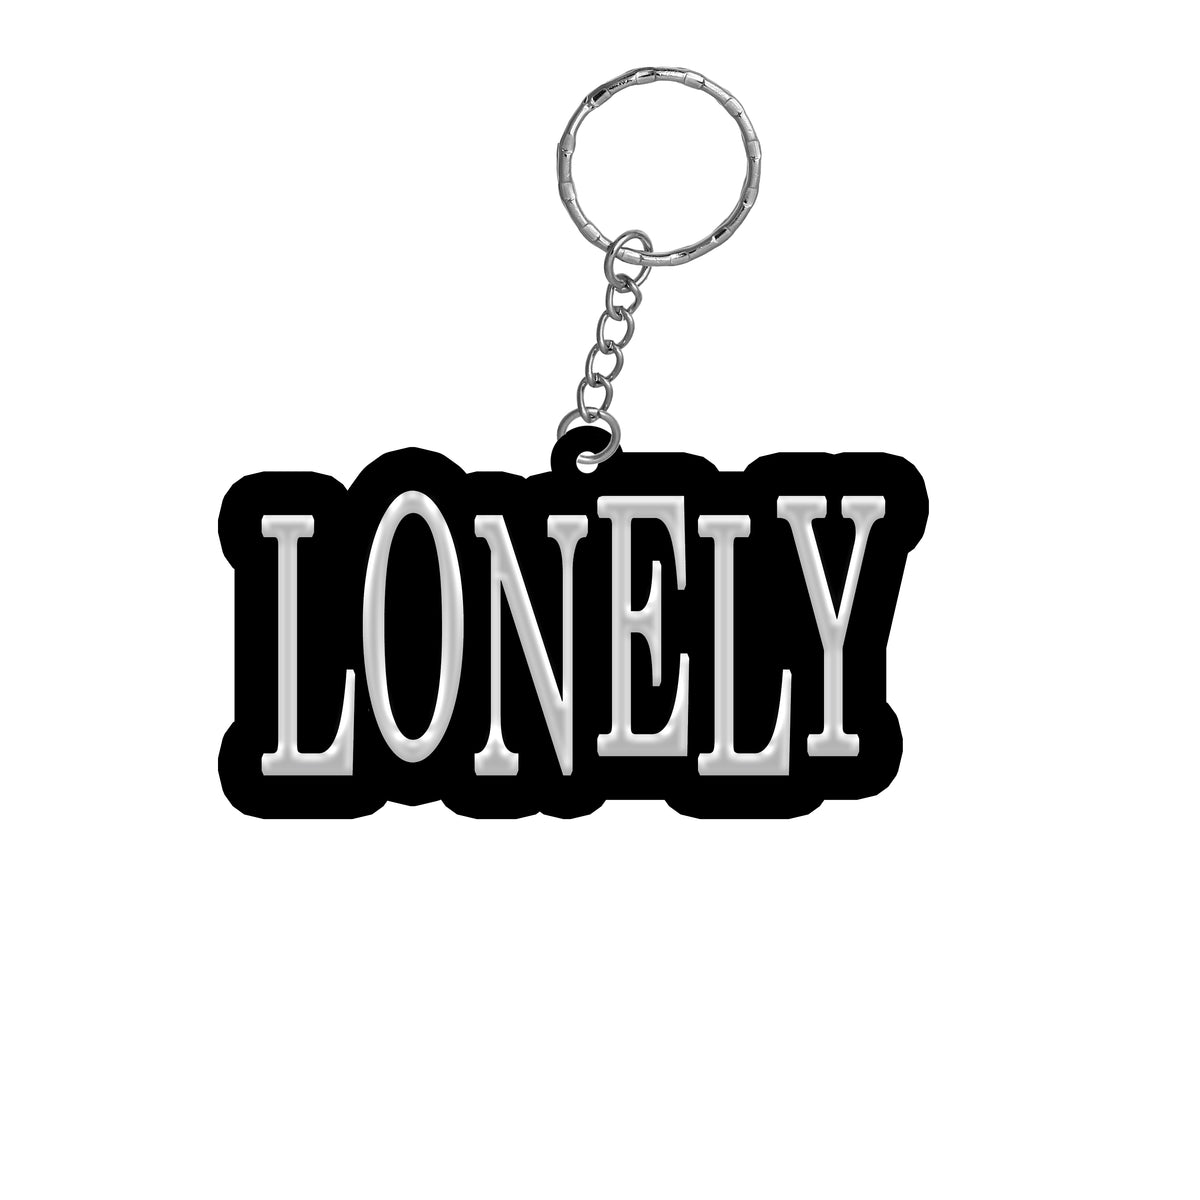 LONELY KEYCHAIN